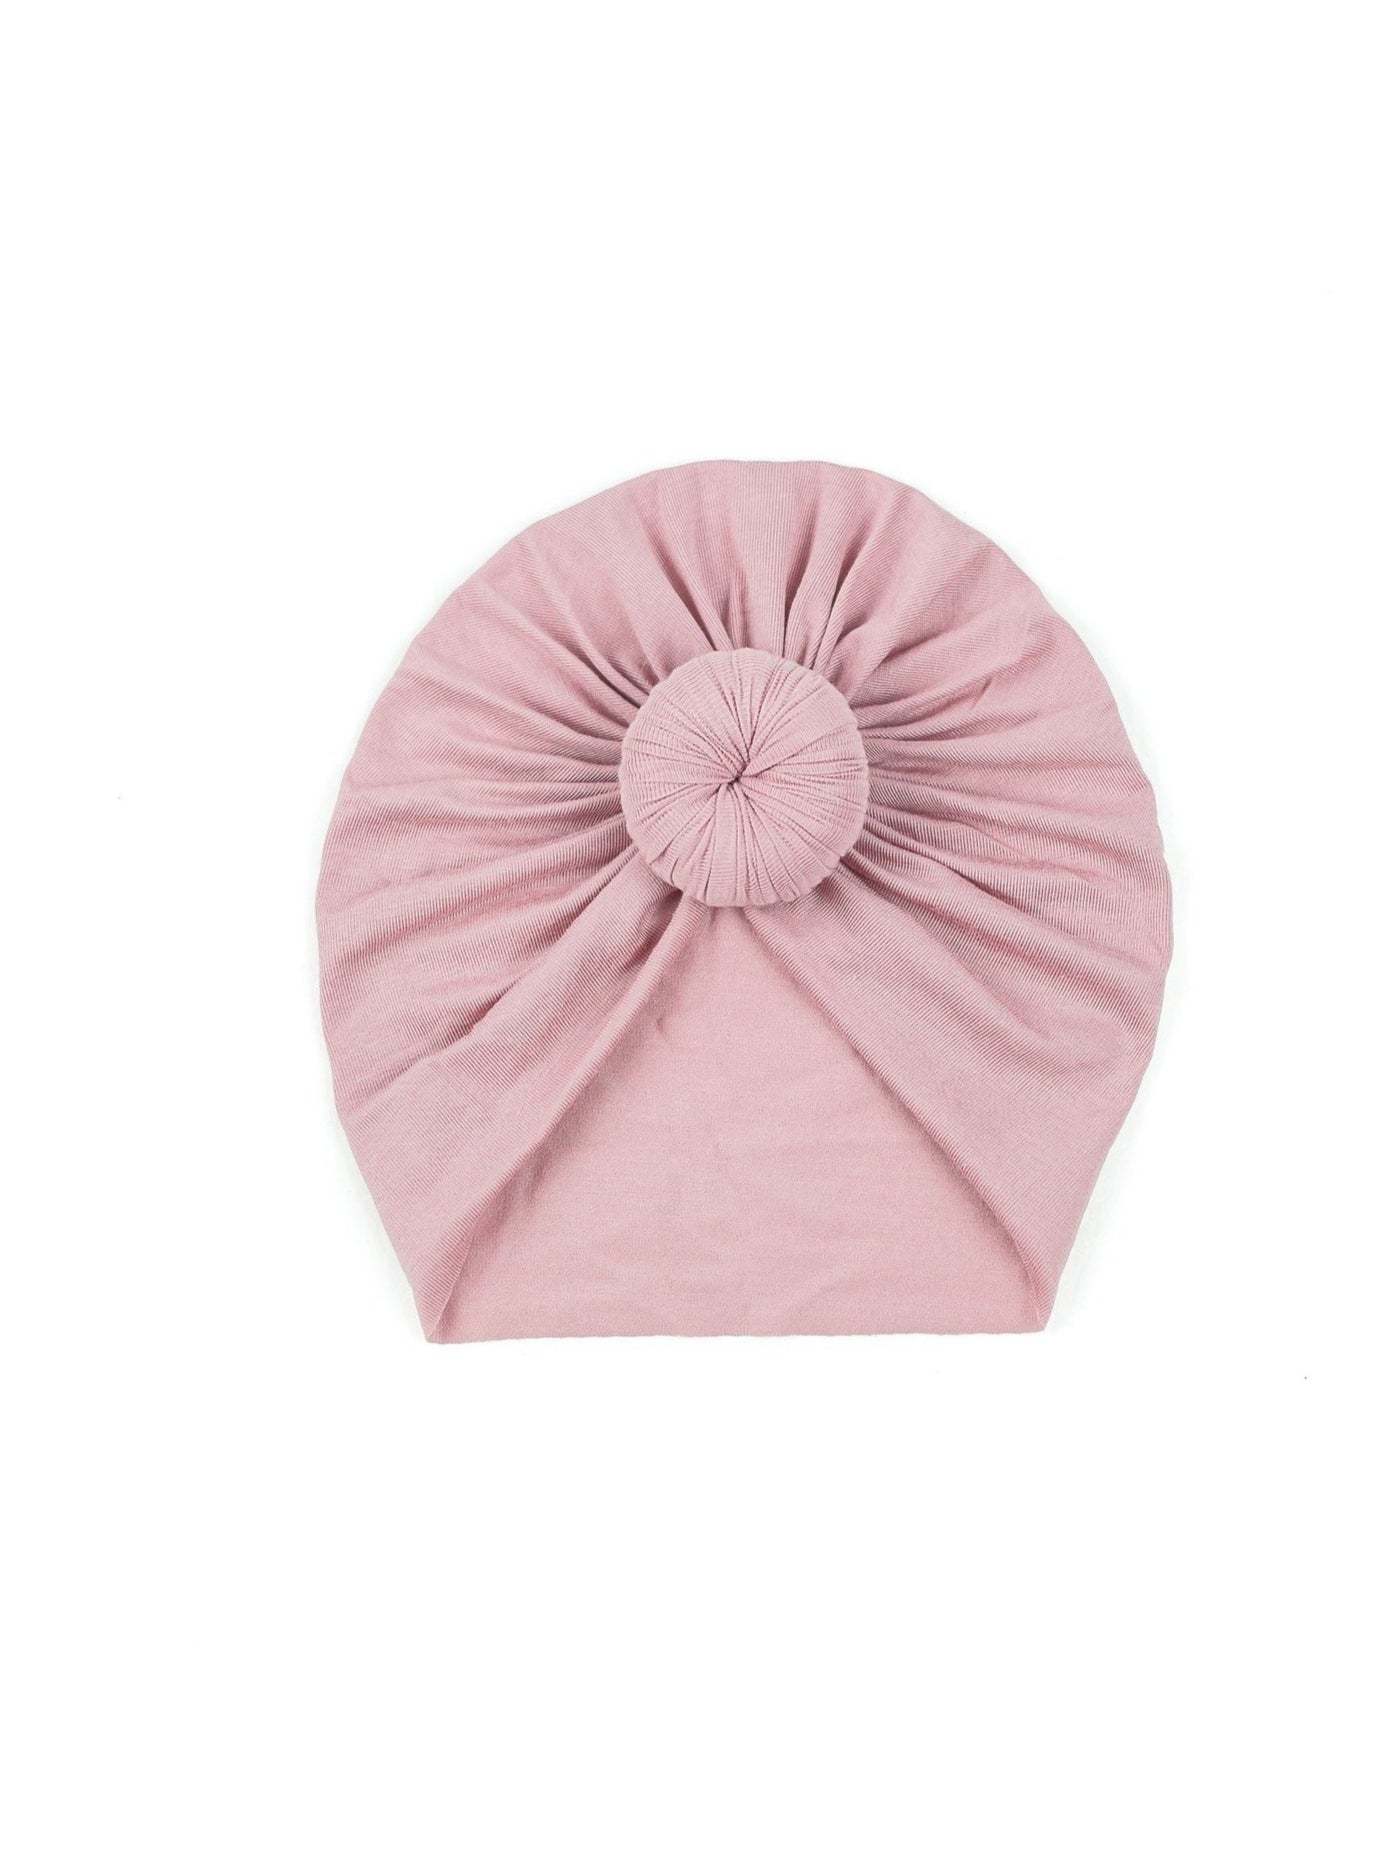 Classic Knot Head Wrap - Dusty Pink